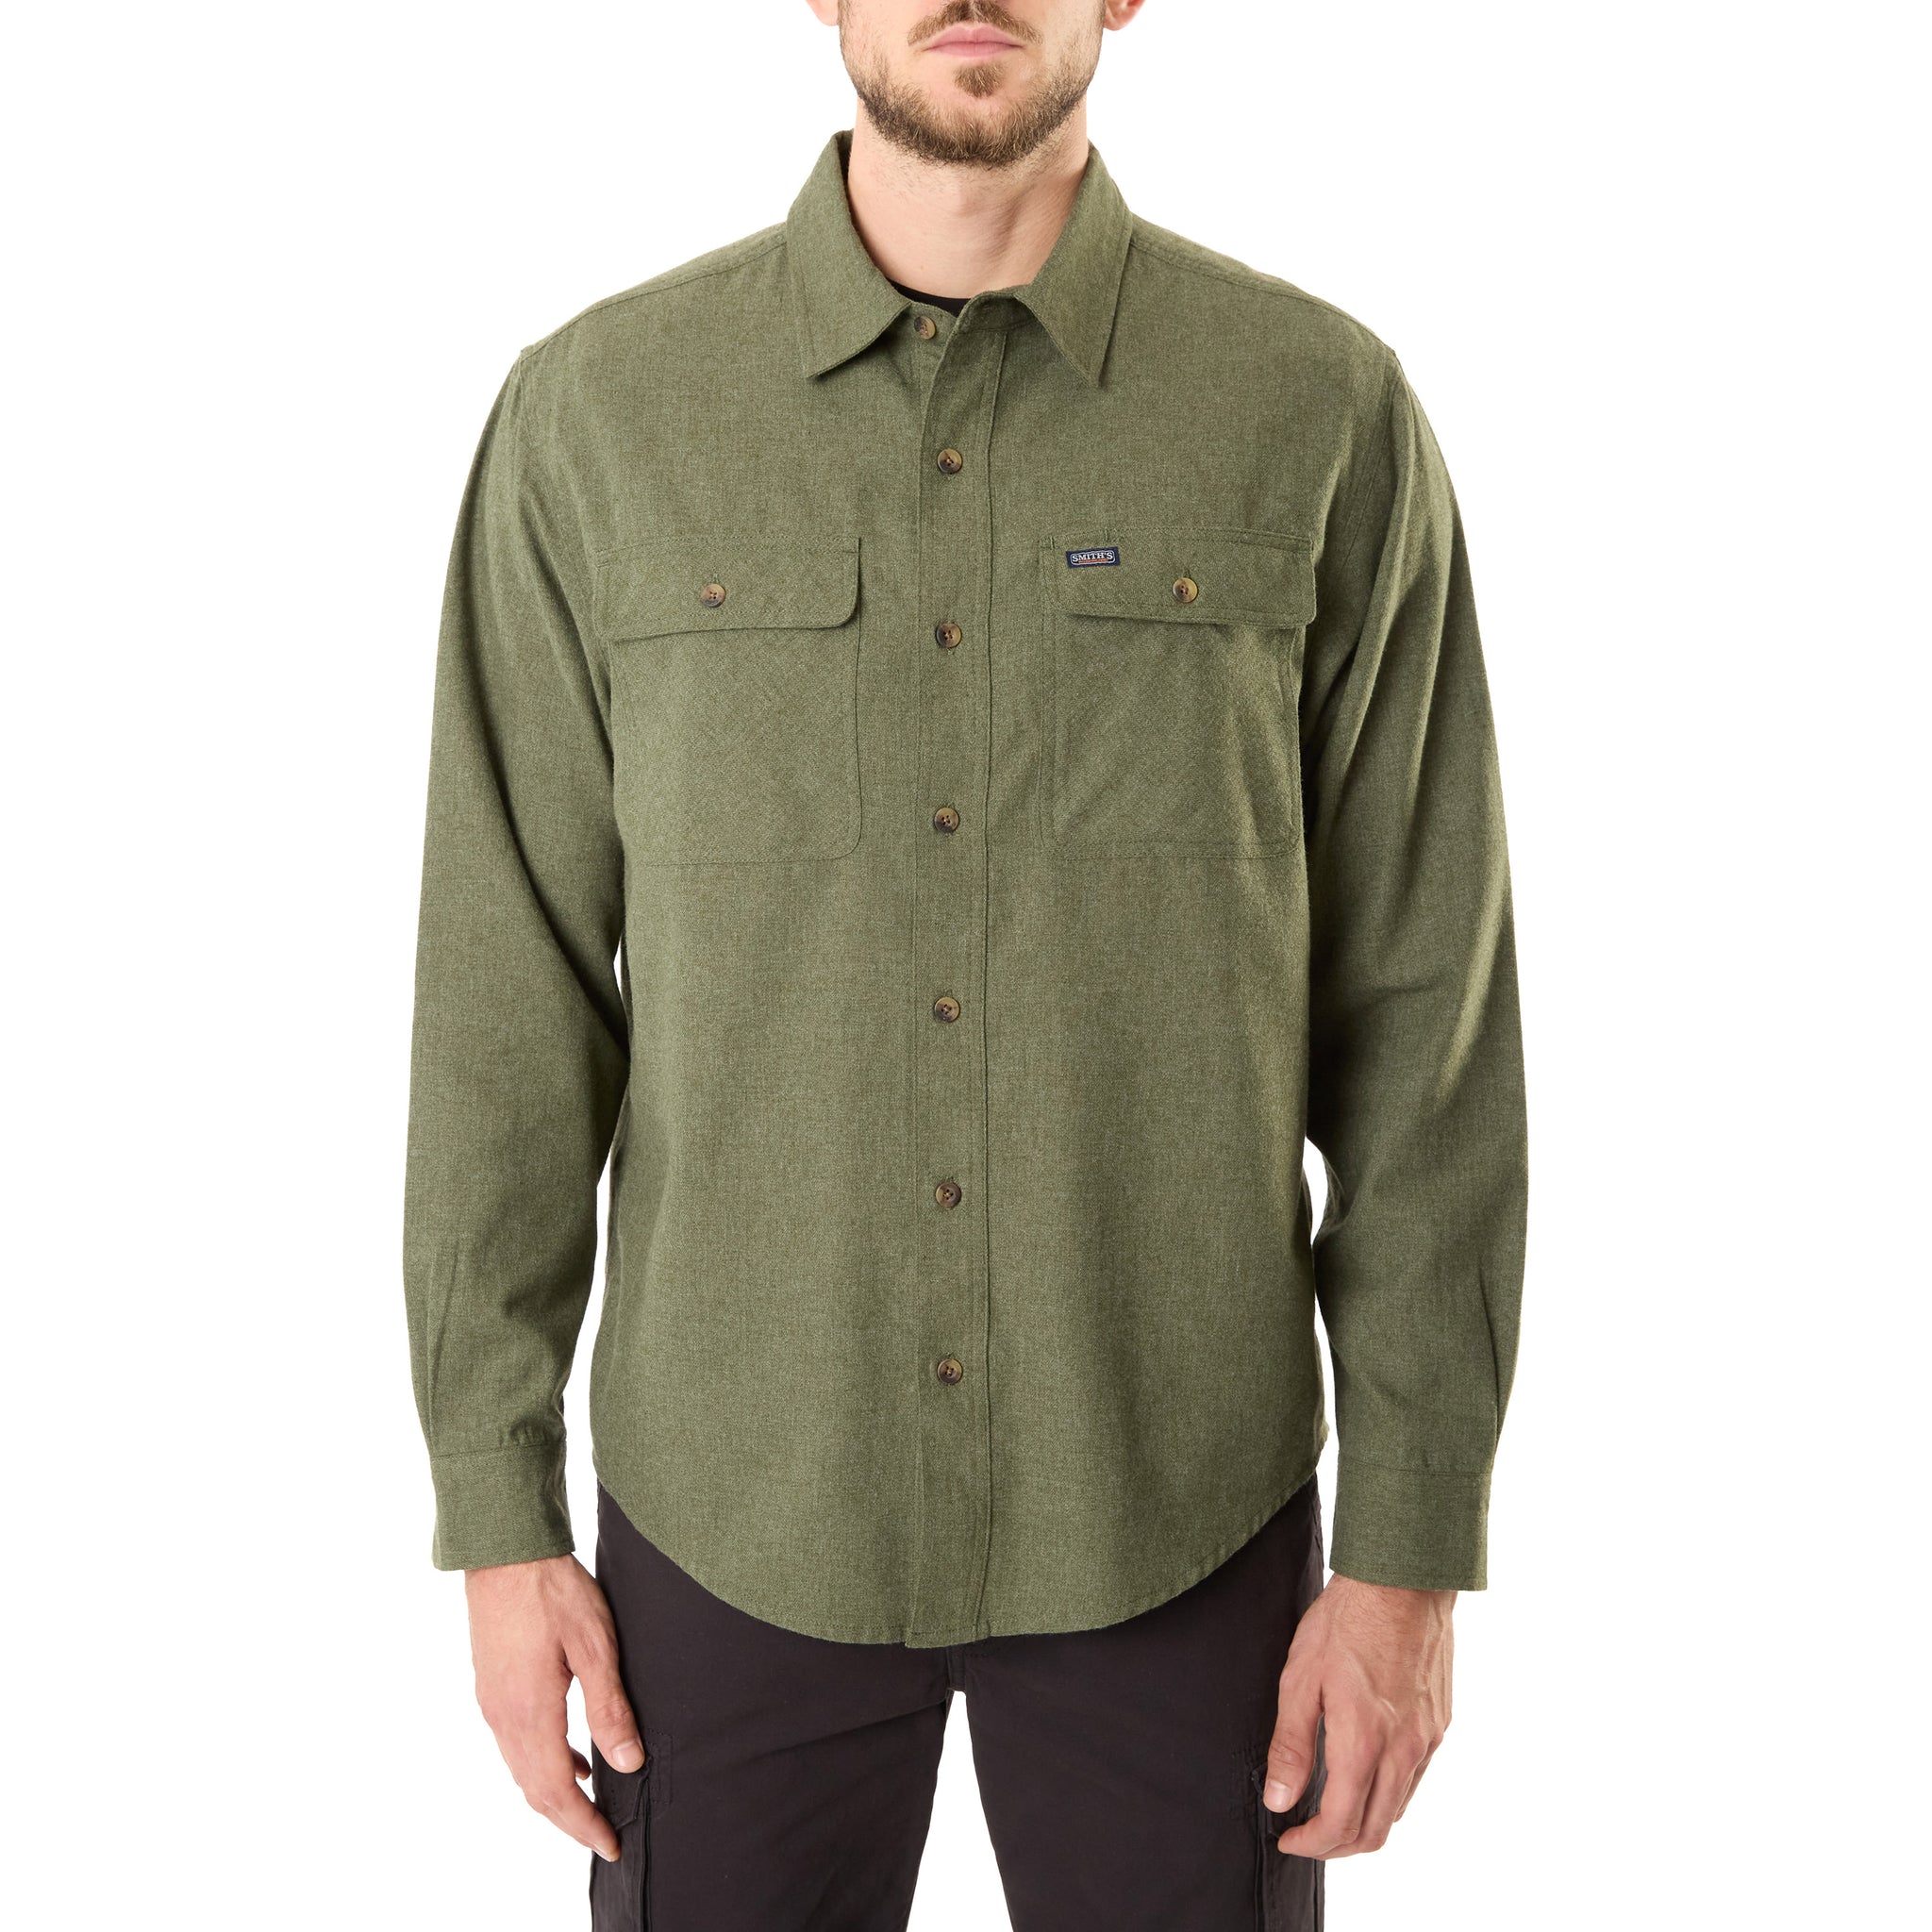 LONG SLEEVE 2-POCKET SOLID HEATHER FLANNEL SHIRT WITH PEN-SLOT